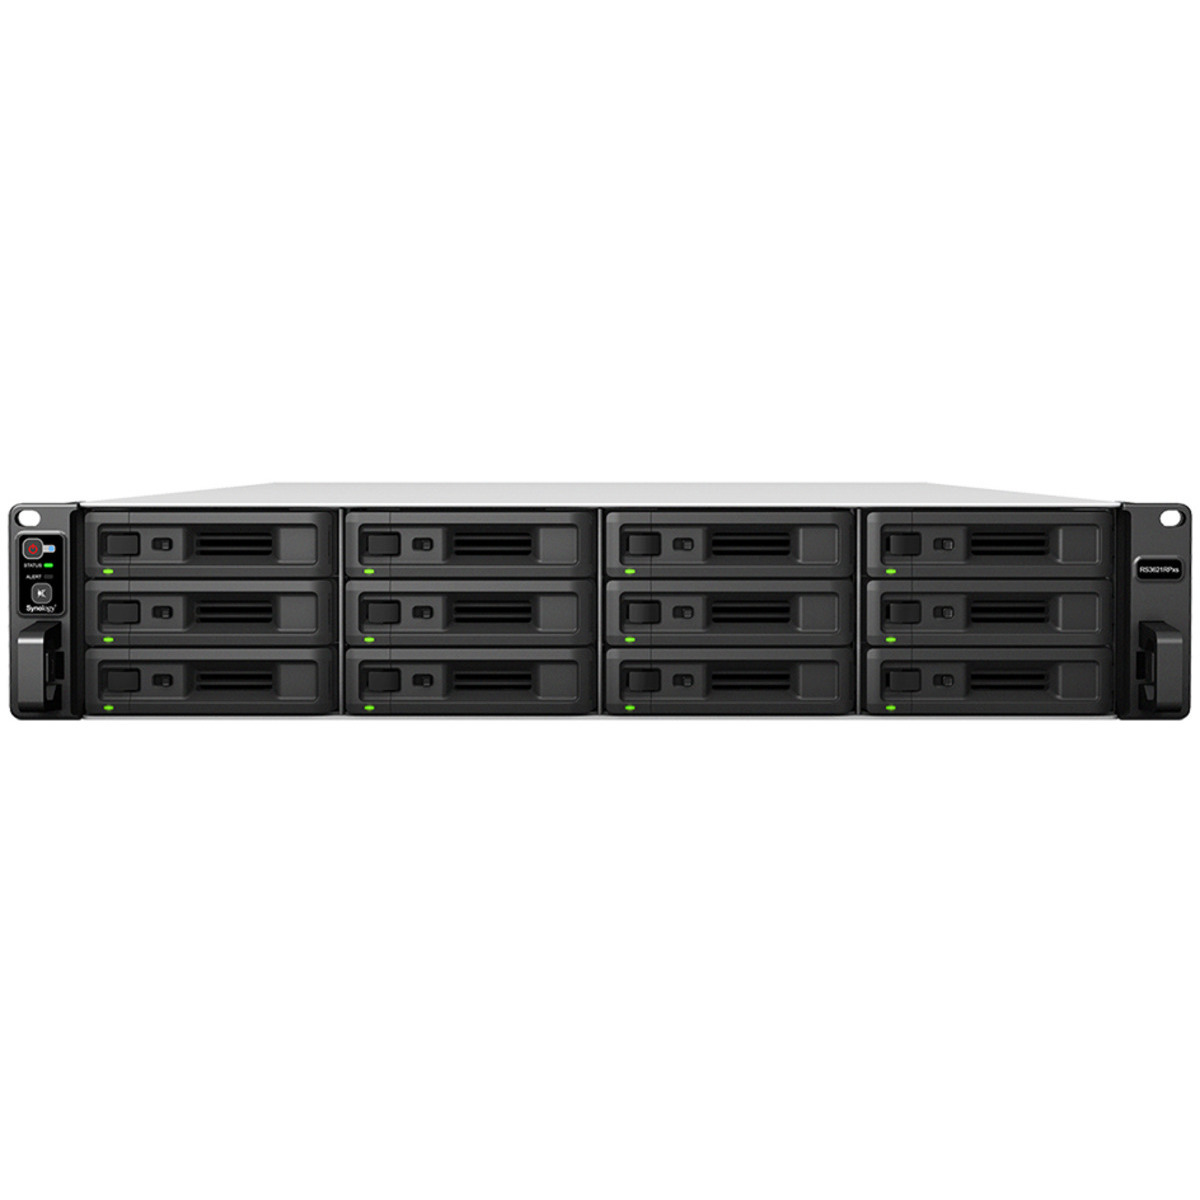 Synology RackStation RS3621RPxs 66tb 12-Bay RackMount Large Business / Enterprise NAS - Network Attached Storage Device 11x6tb Western Digital Red Plus WD60EFPX 3.5 5640rpm SATA 6Gb/s HDD NAS Class Drives Installed - Burn-In Tested RackStation RS3621RPxs